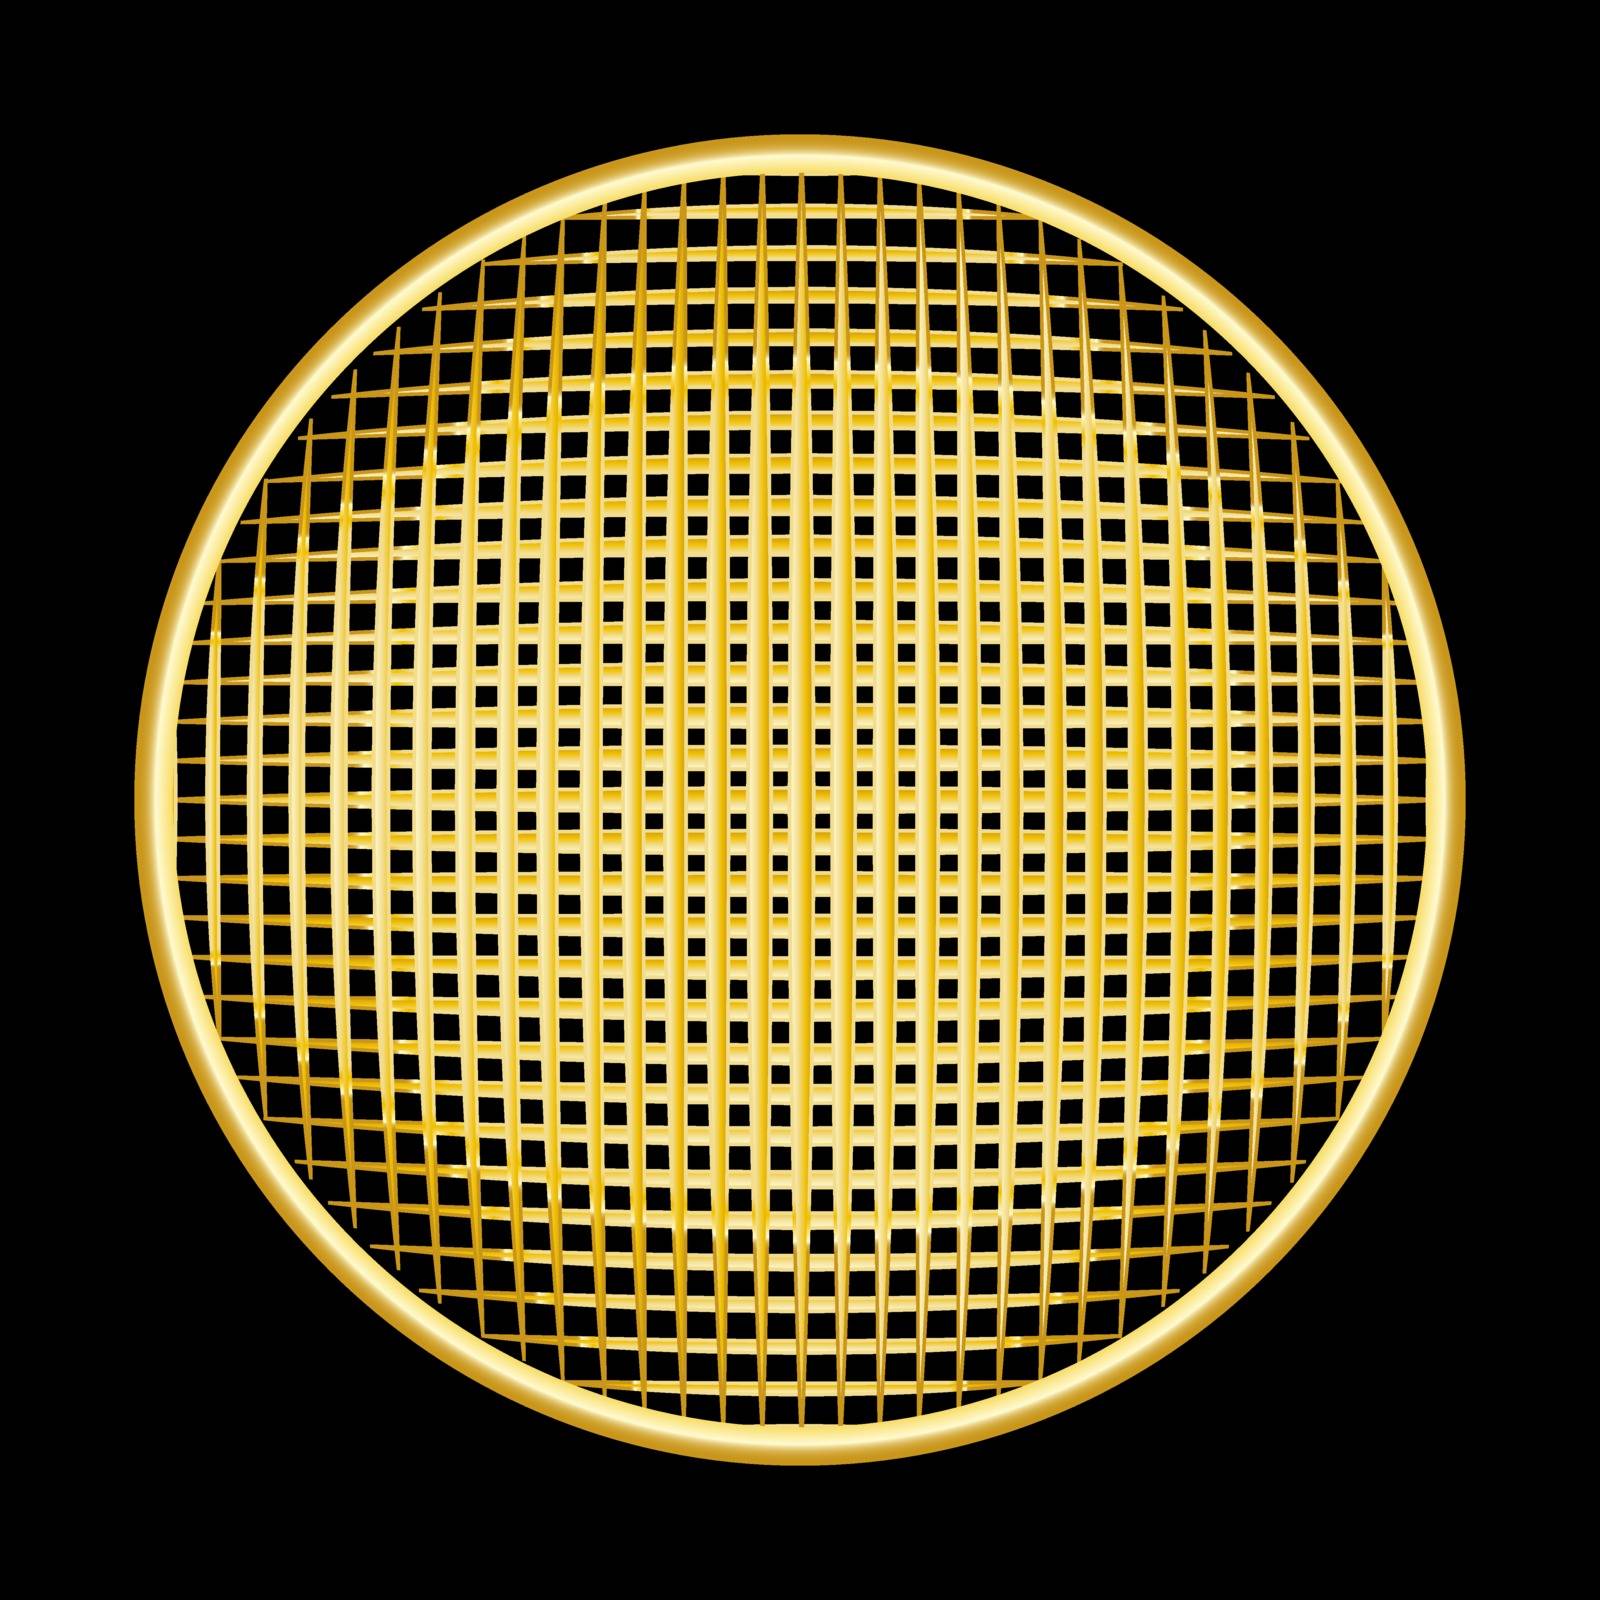 circle of vertical and horizontal lines in a ring in gold shades on a black background